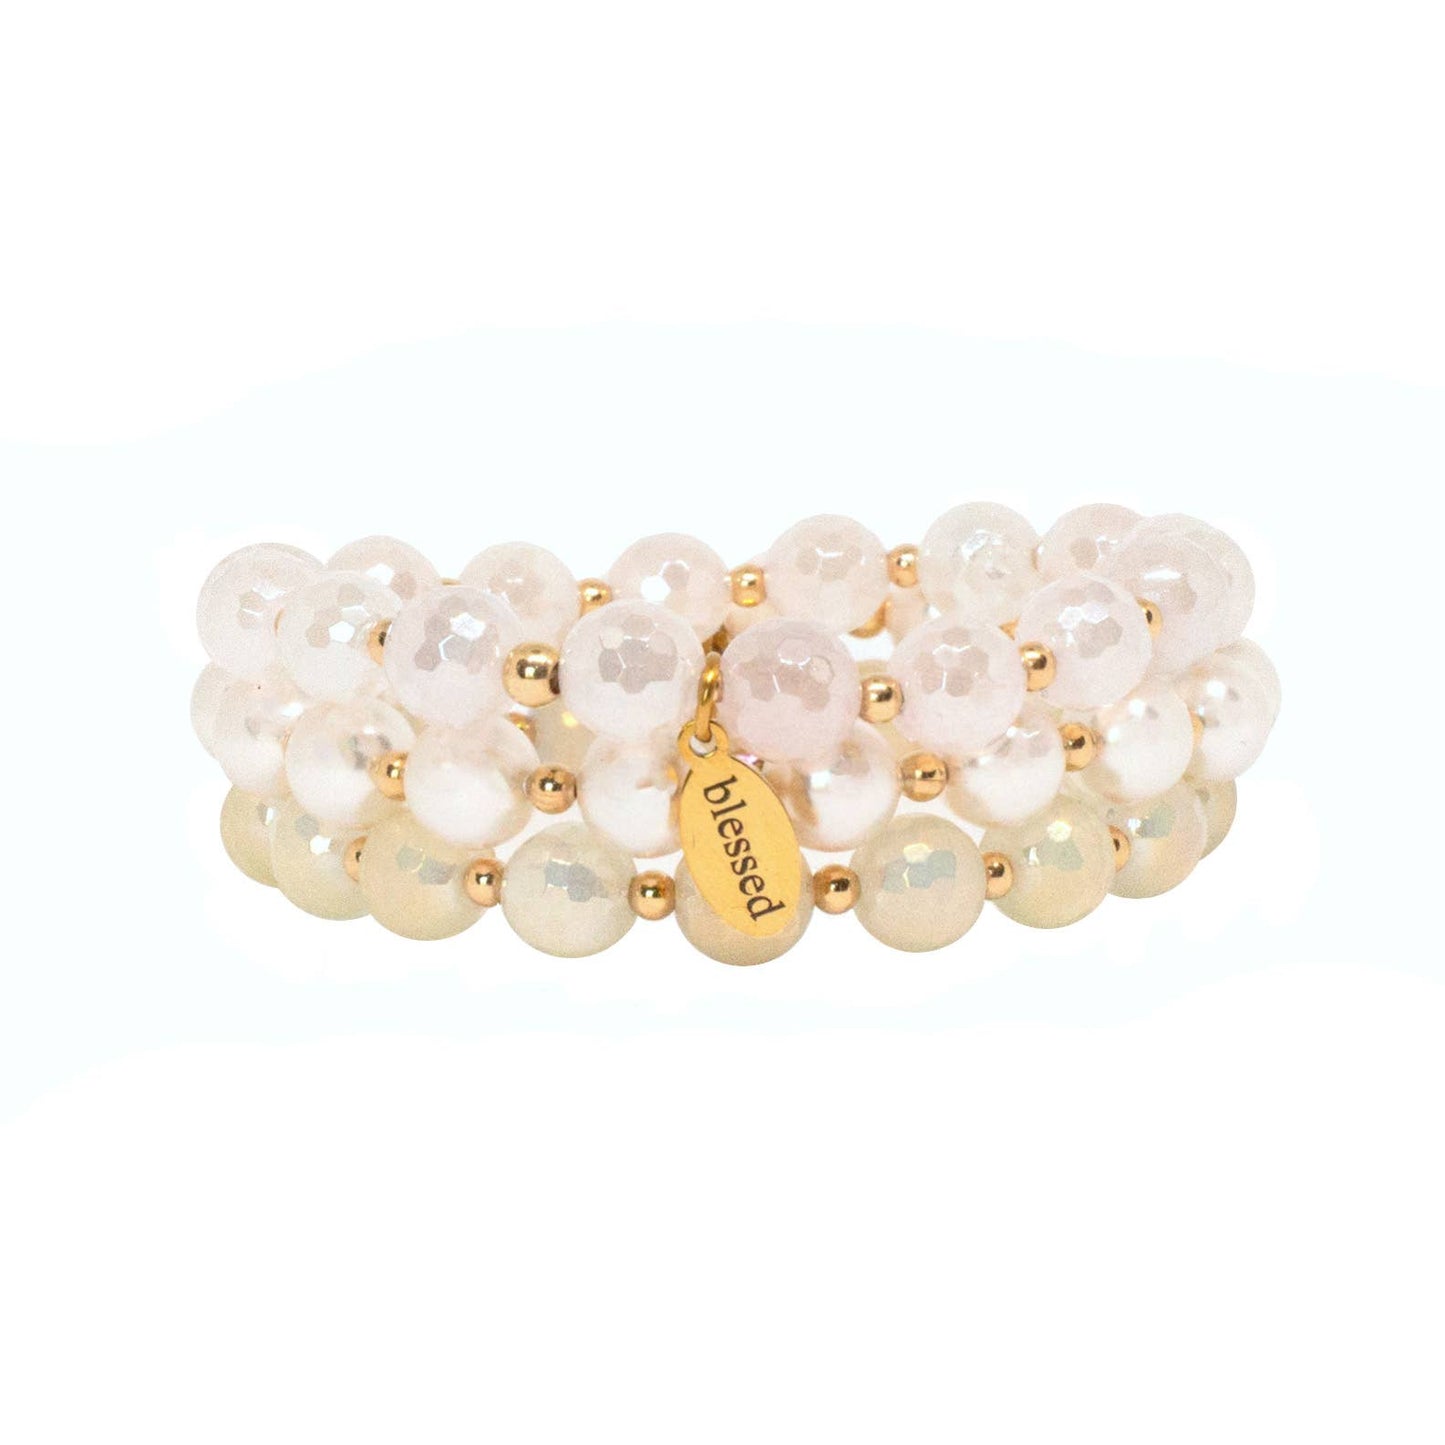 Count Your Blessings Bracelet in White Pearl in Gold: L